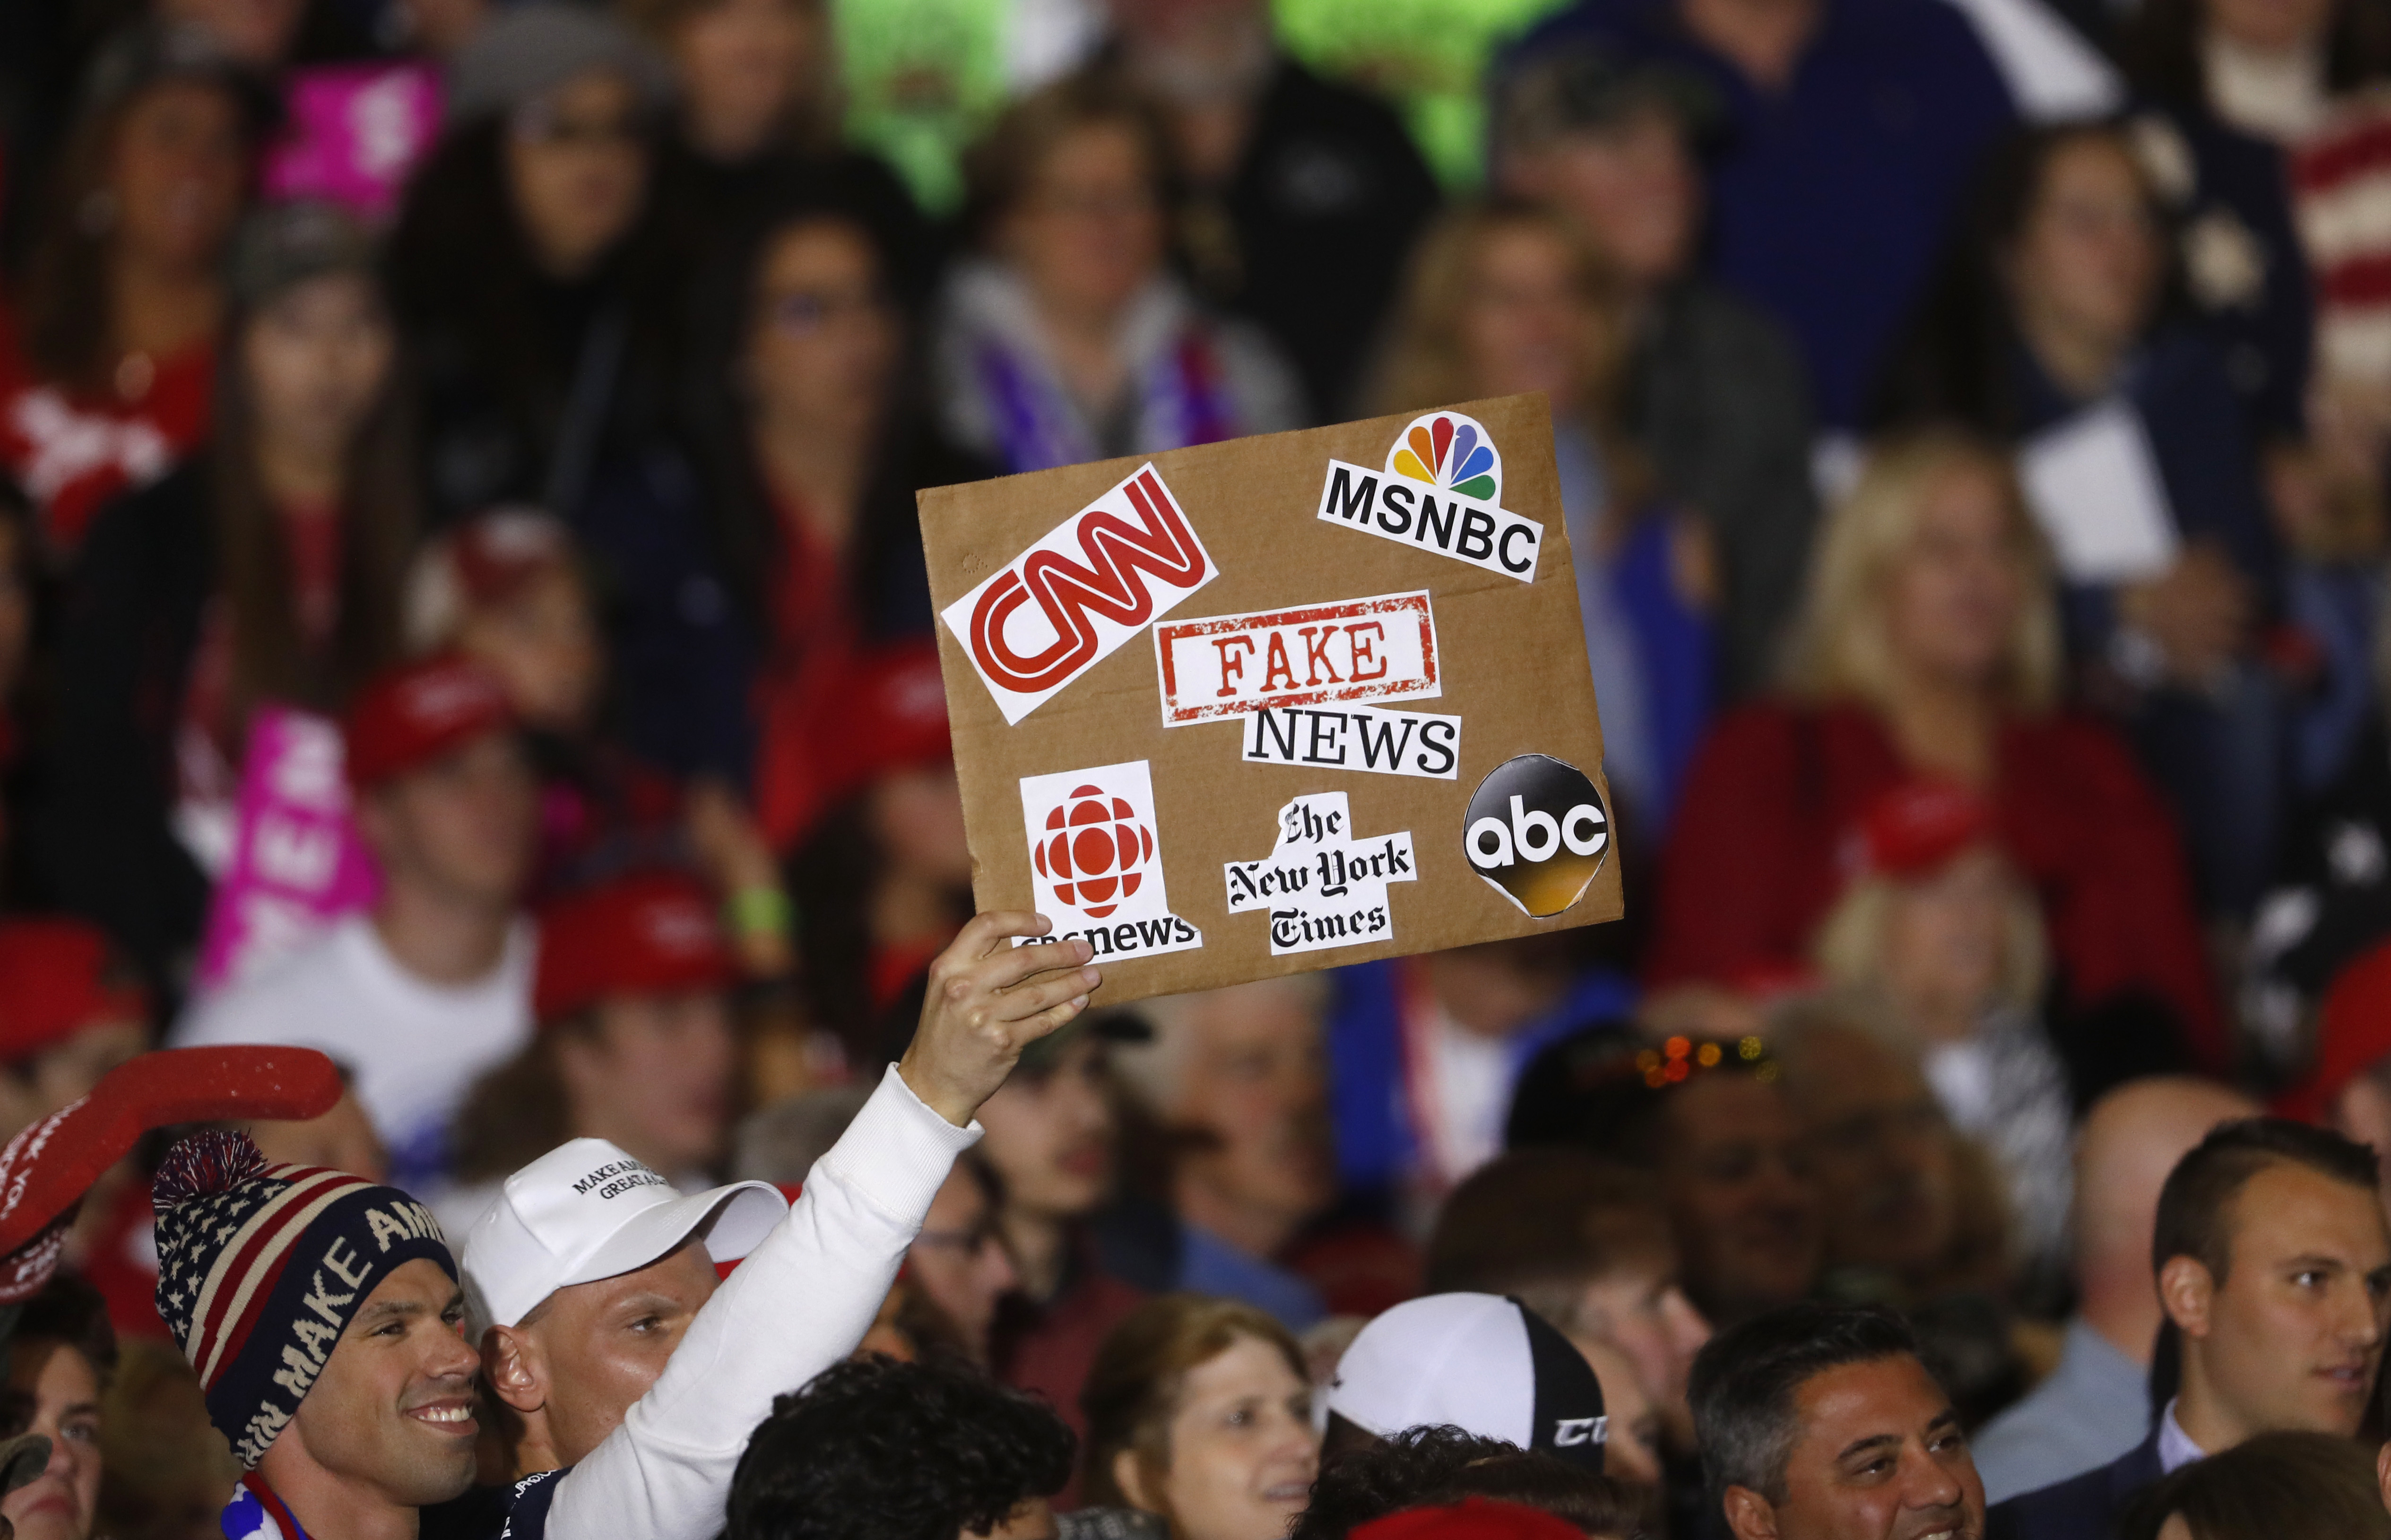 An audience member holds a fake news sign during a President Donald Trump campaign rally in Washington Township, Michigan